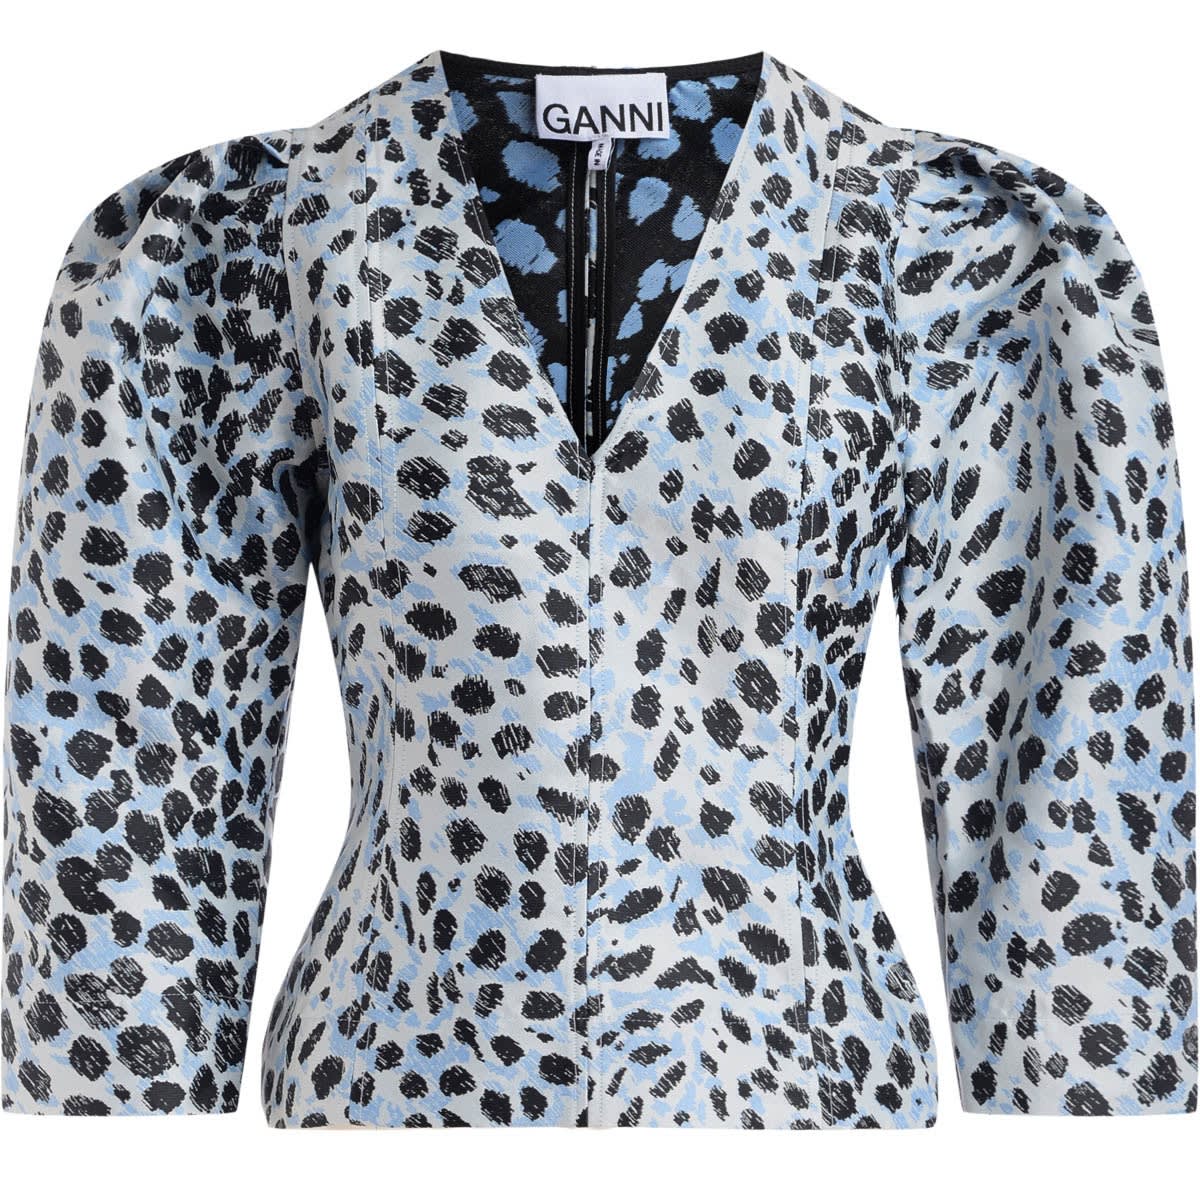 Ganni Blouse In Light Blue And Black Spotted Jaquard